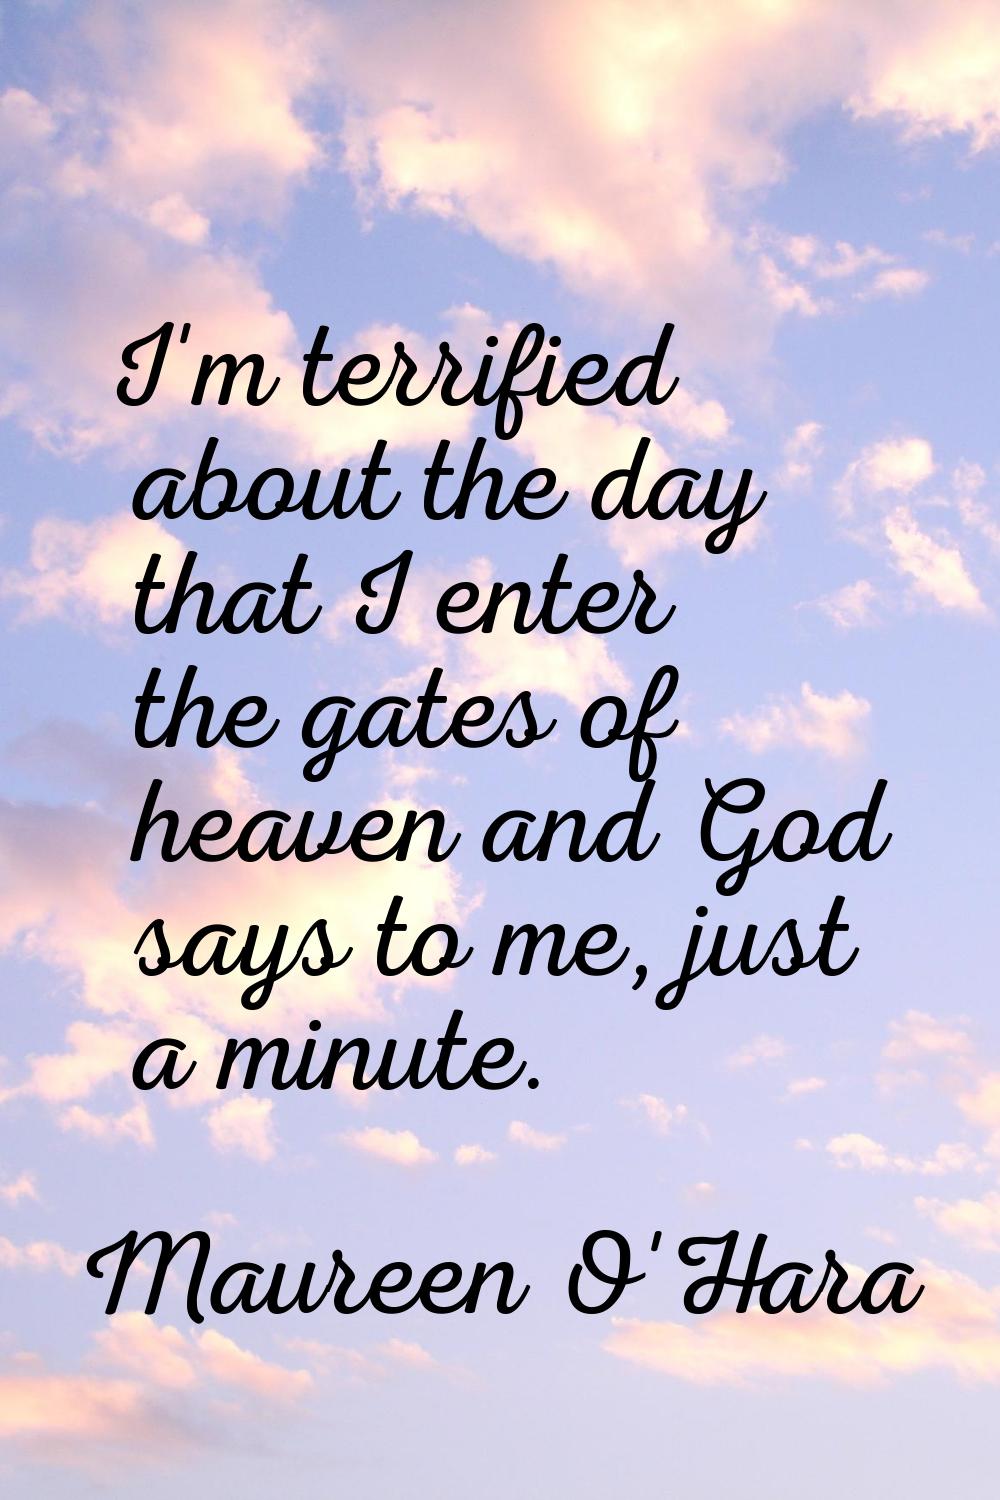 I'm terrified about the day that I enter the gates of heaven and God says to me, just a minute.